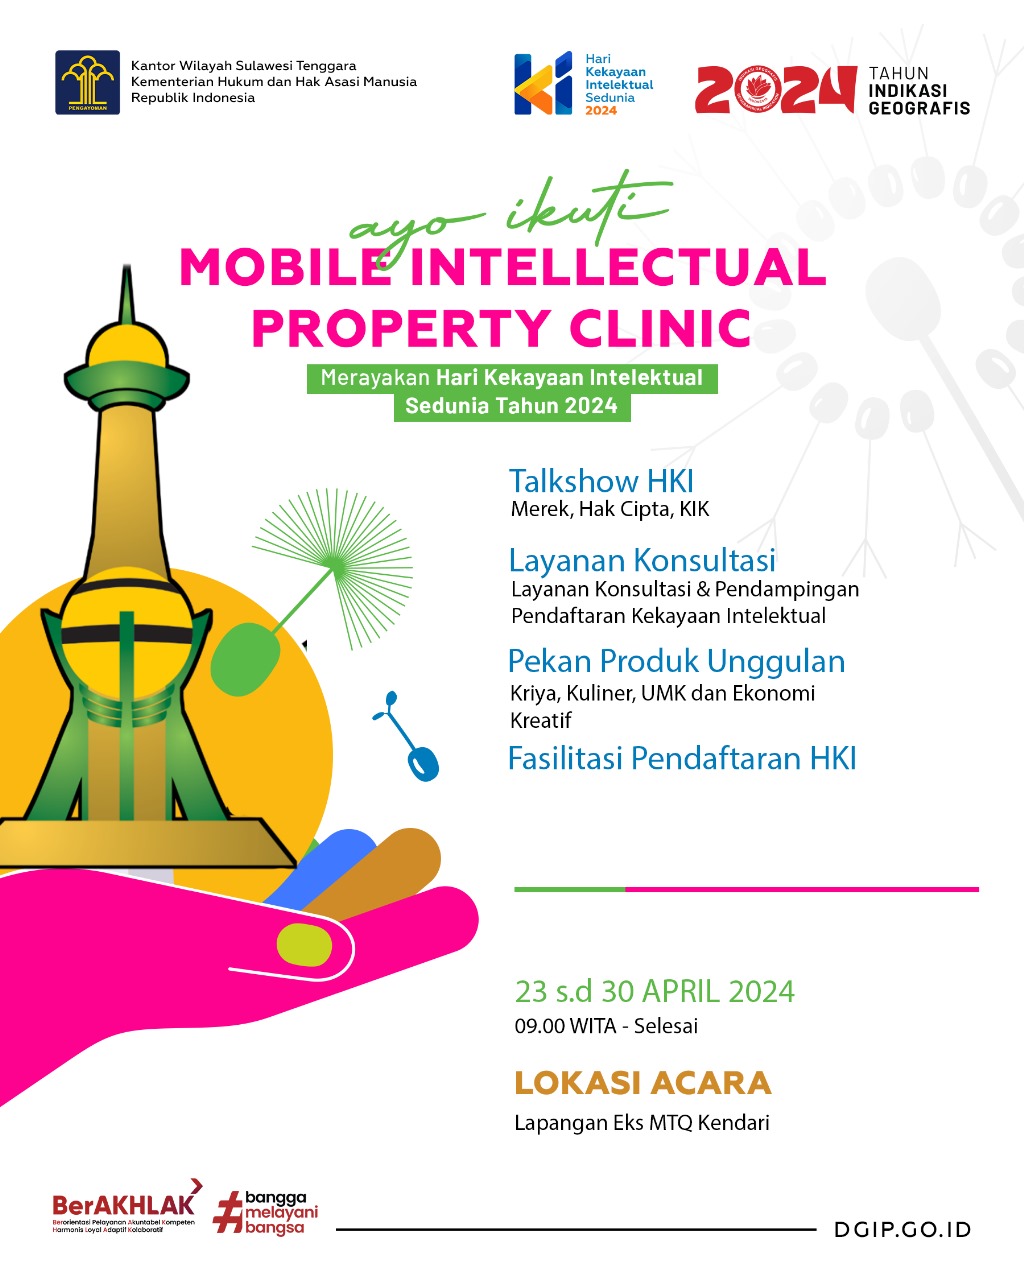 Mobile Intellectual Property Clinic